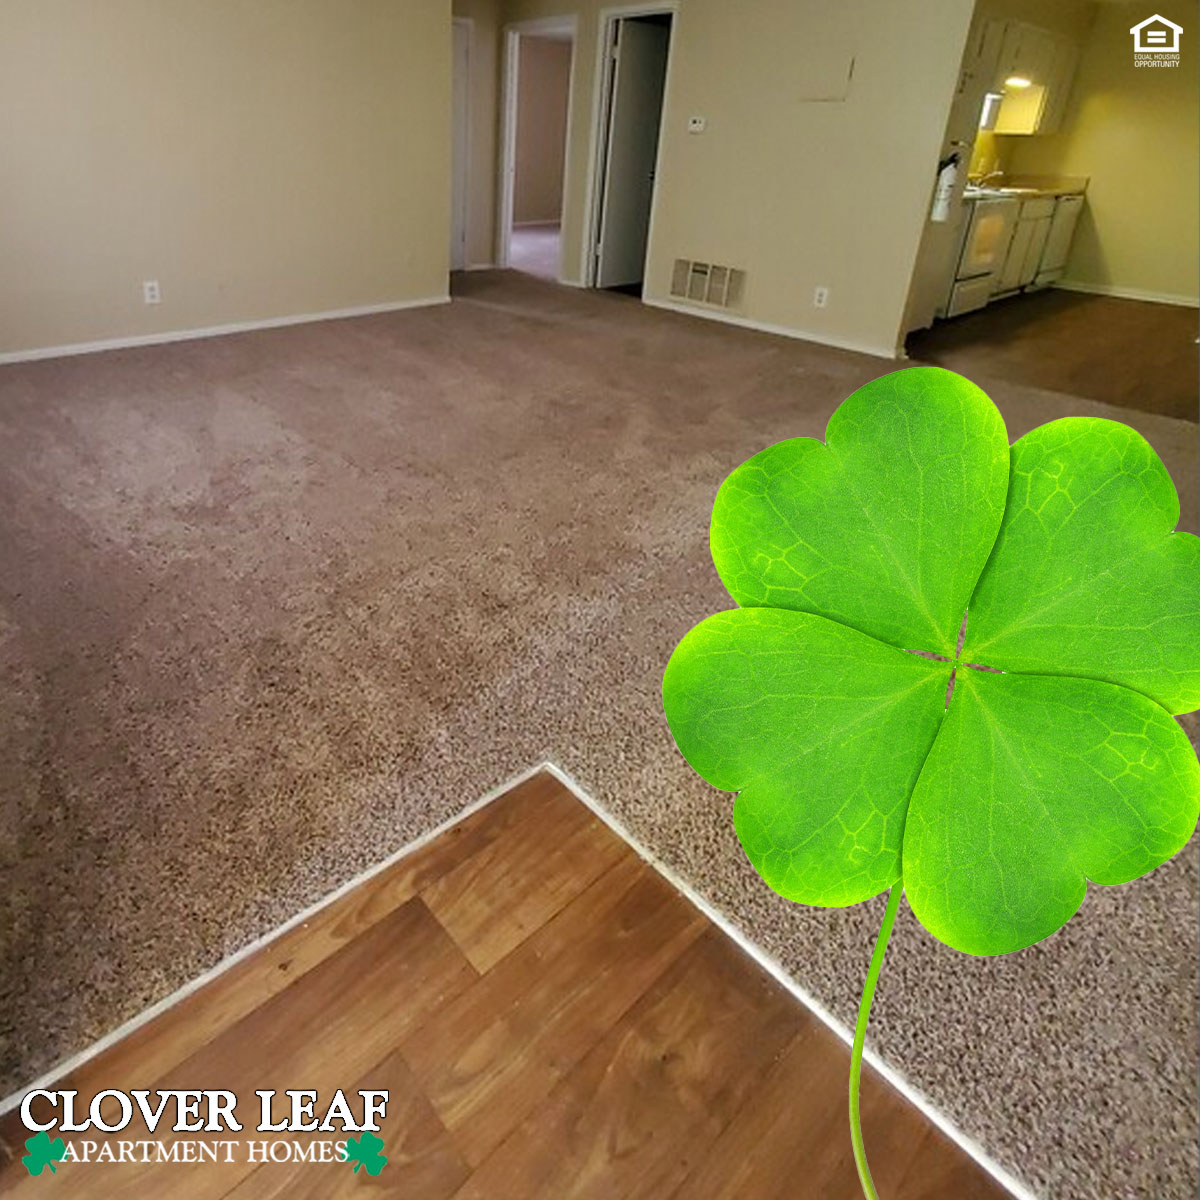 When you live at #CloverLeaf #Apartment Homes, you can count yourself one of the lucky ones! 📍🍀

👉 From plush #carpeting and sleek #woodflooring to spacious #livingrooms and well-equipped #kitchens, life is made comfortable and easy. To see more, visit cloverleafal.com.